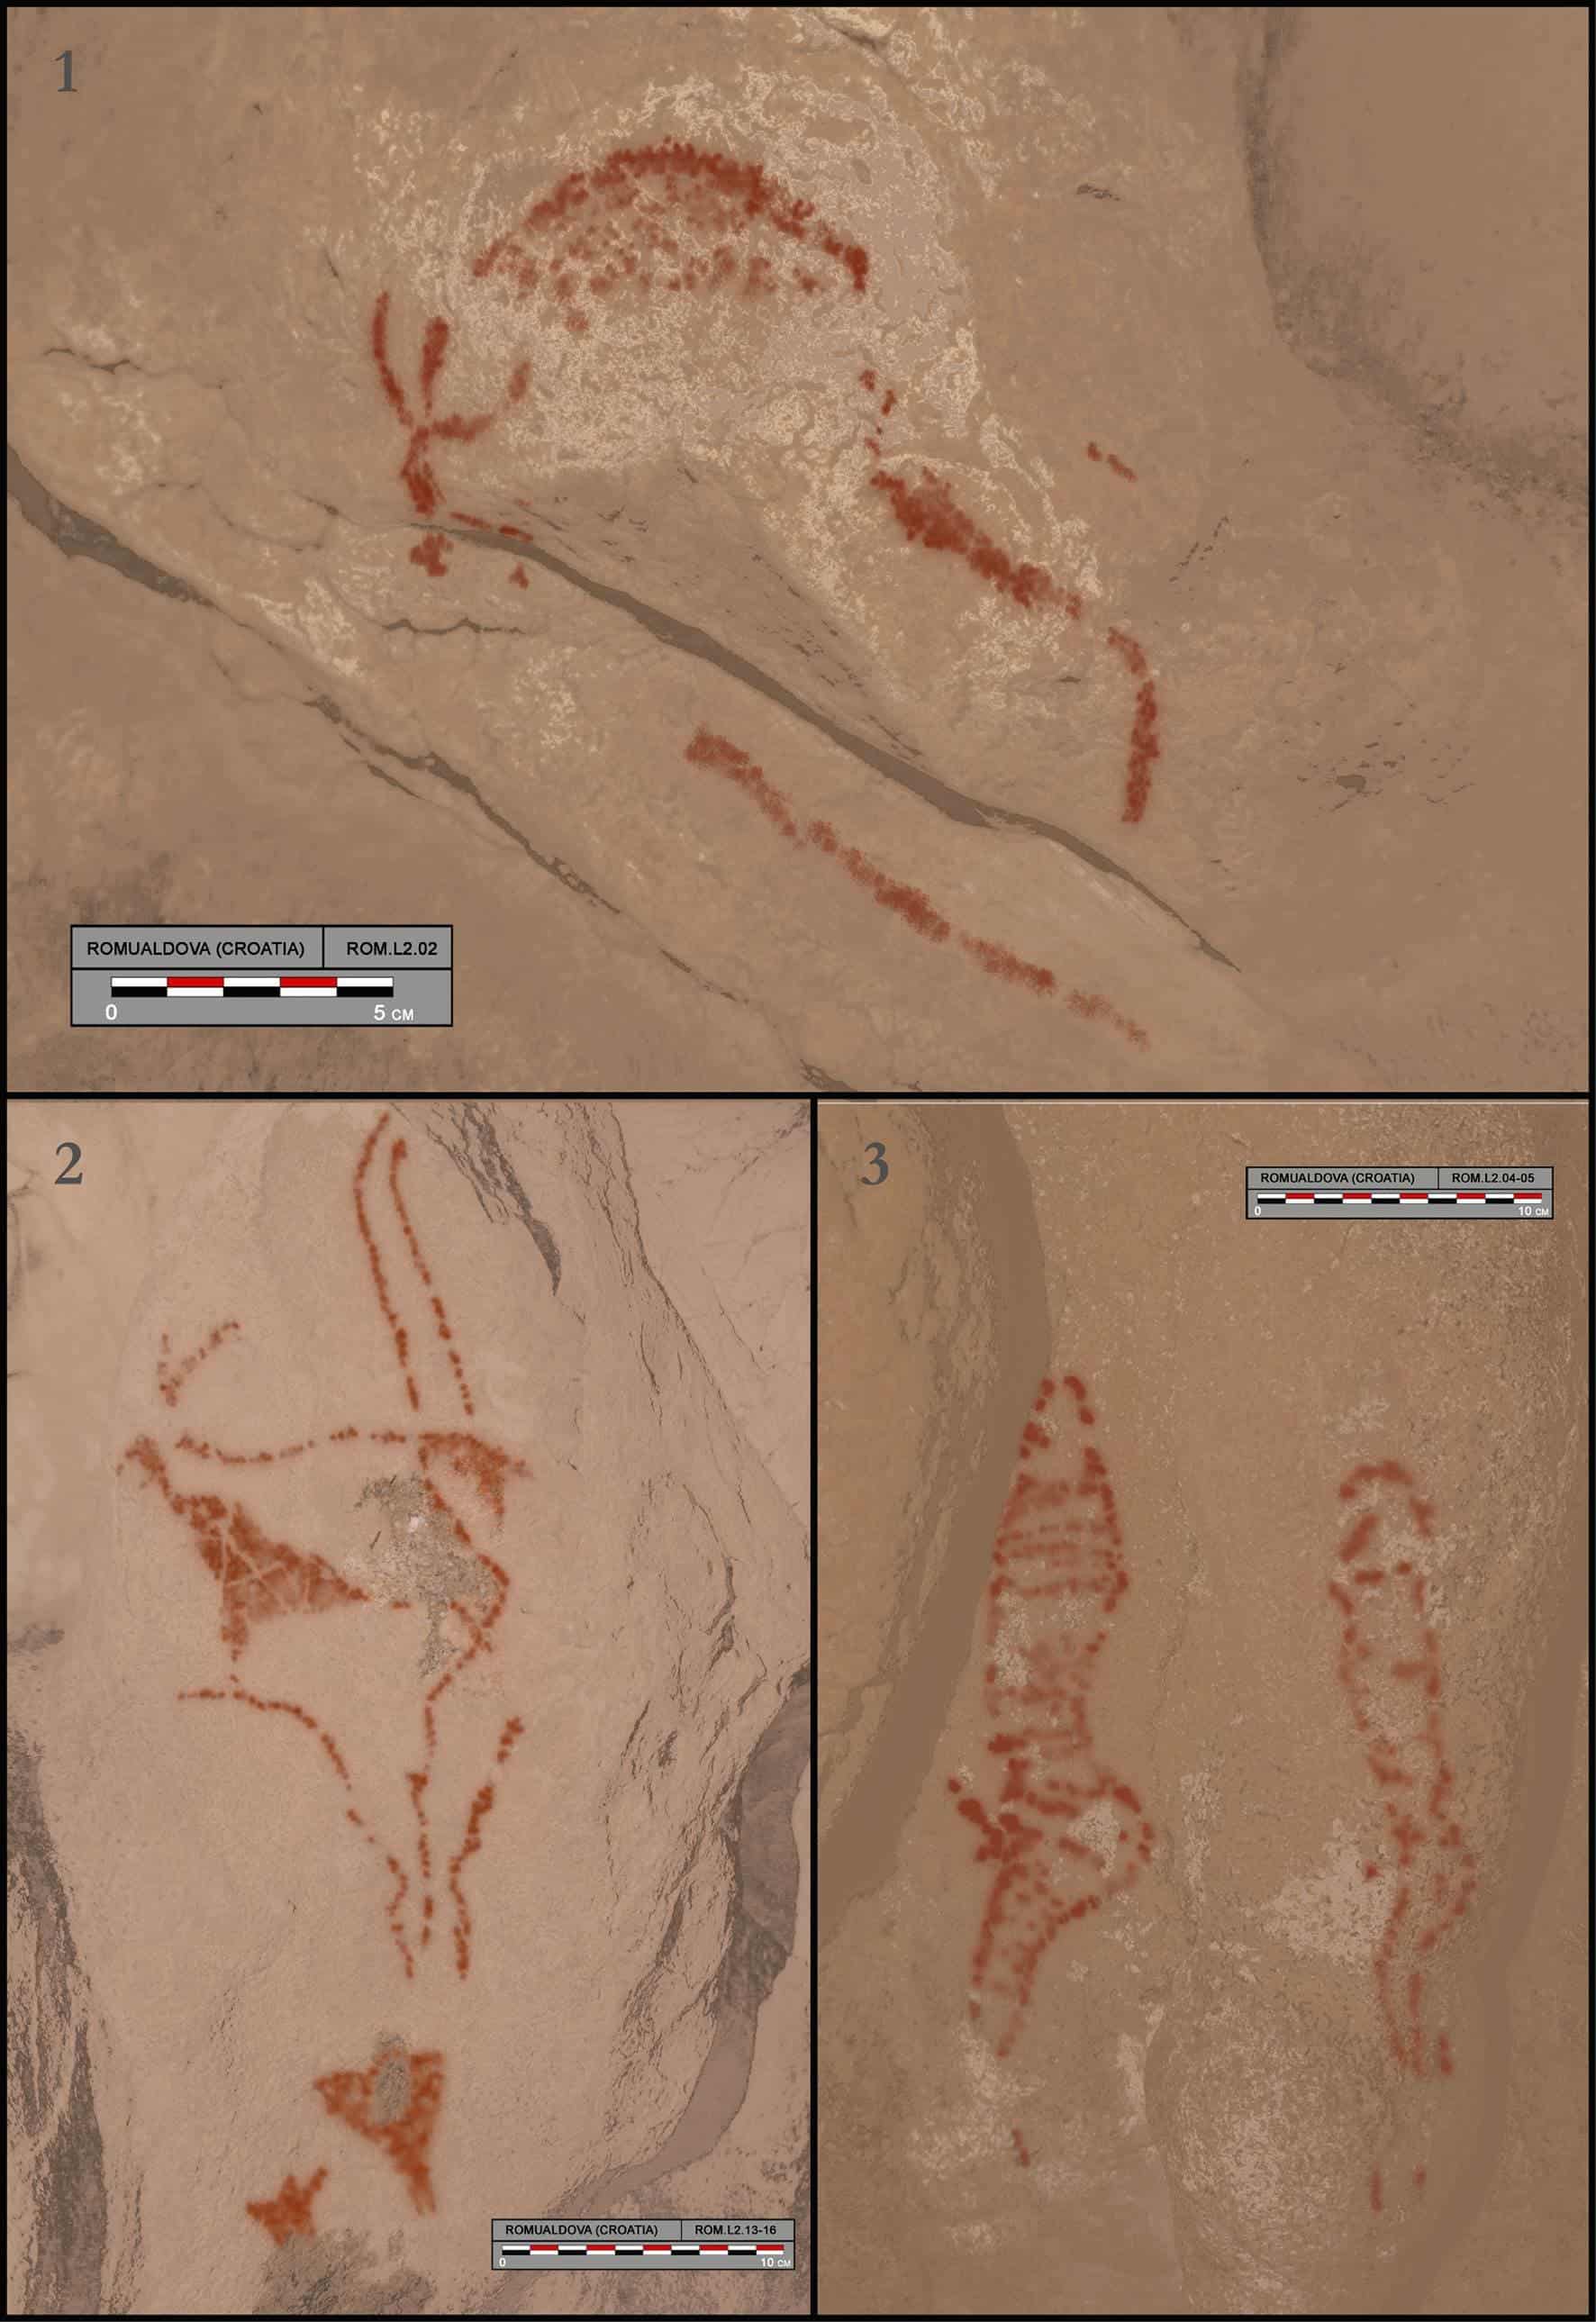 Composite of digital tracings of 1 Bison_2 ibex and 3 possible anthropomorphic figures from cave art – Credit Aitor Ruiz-Redondo